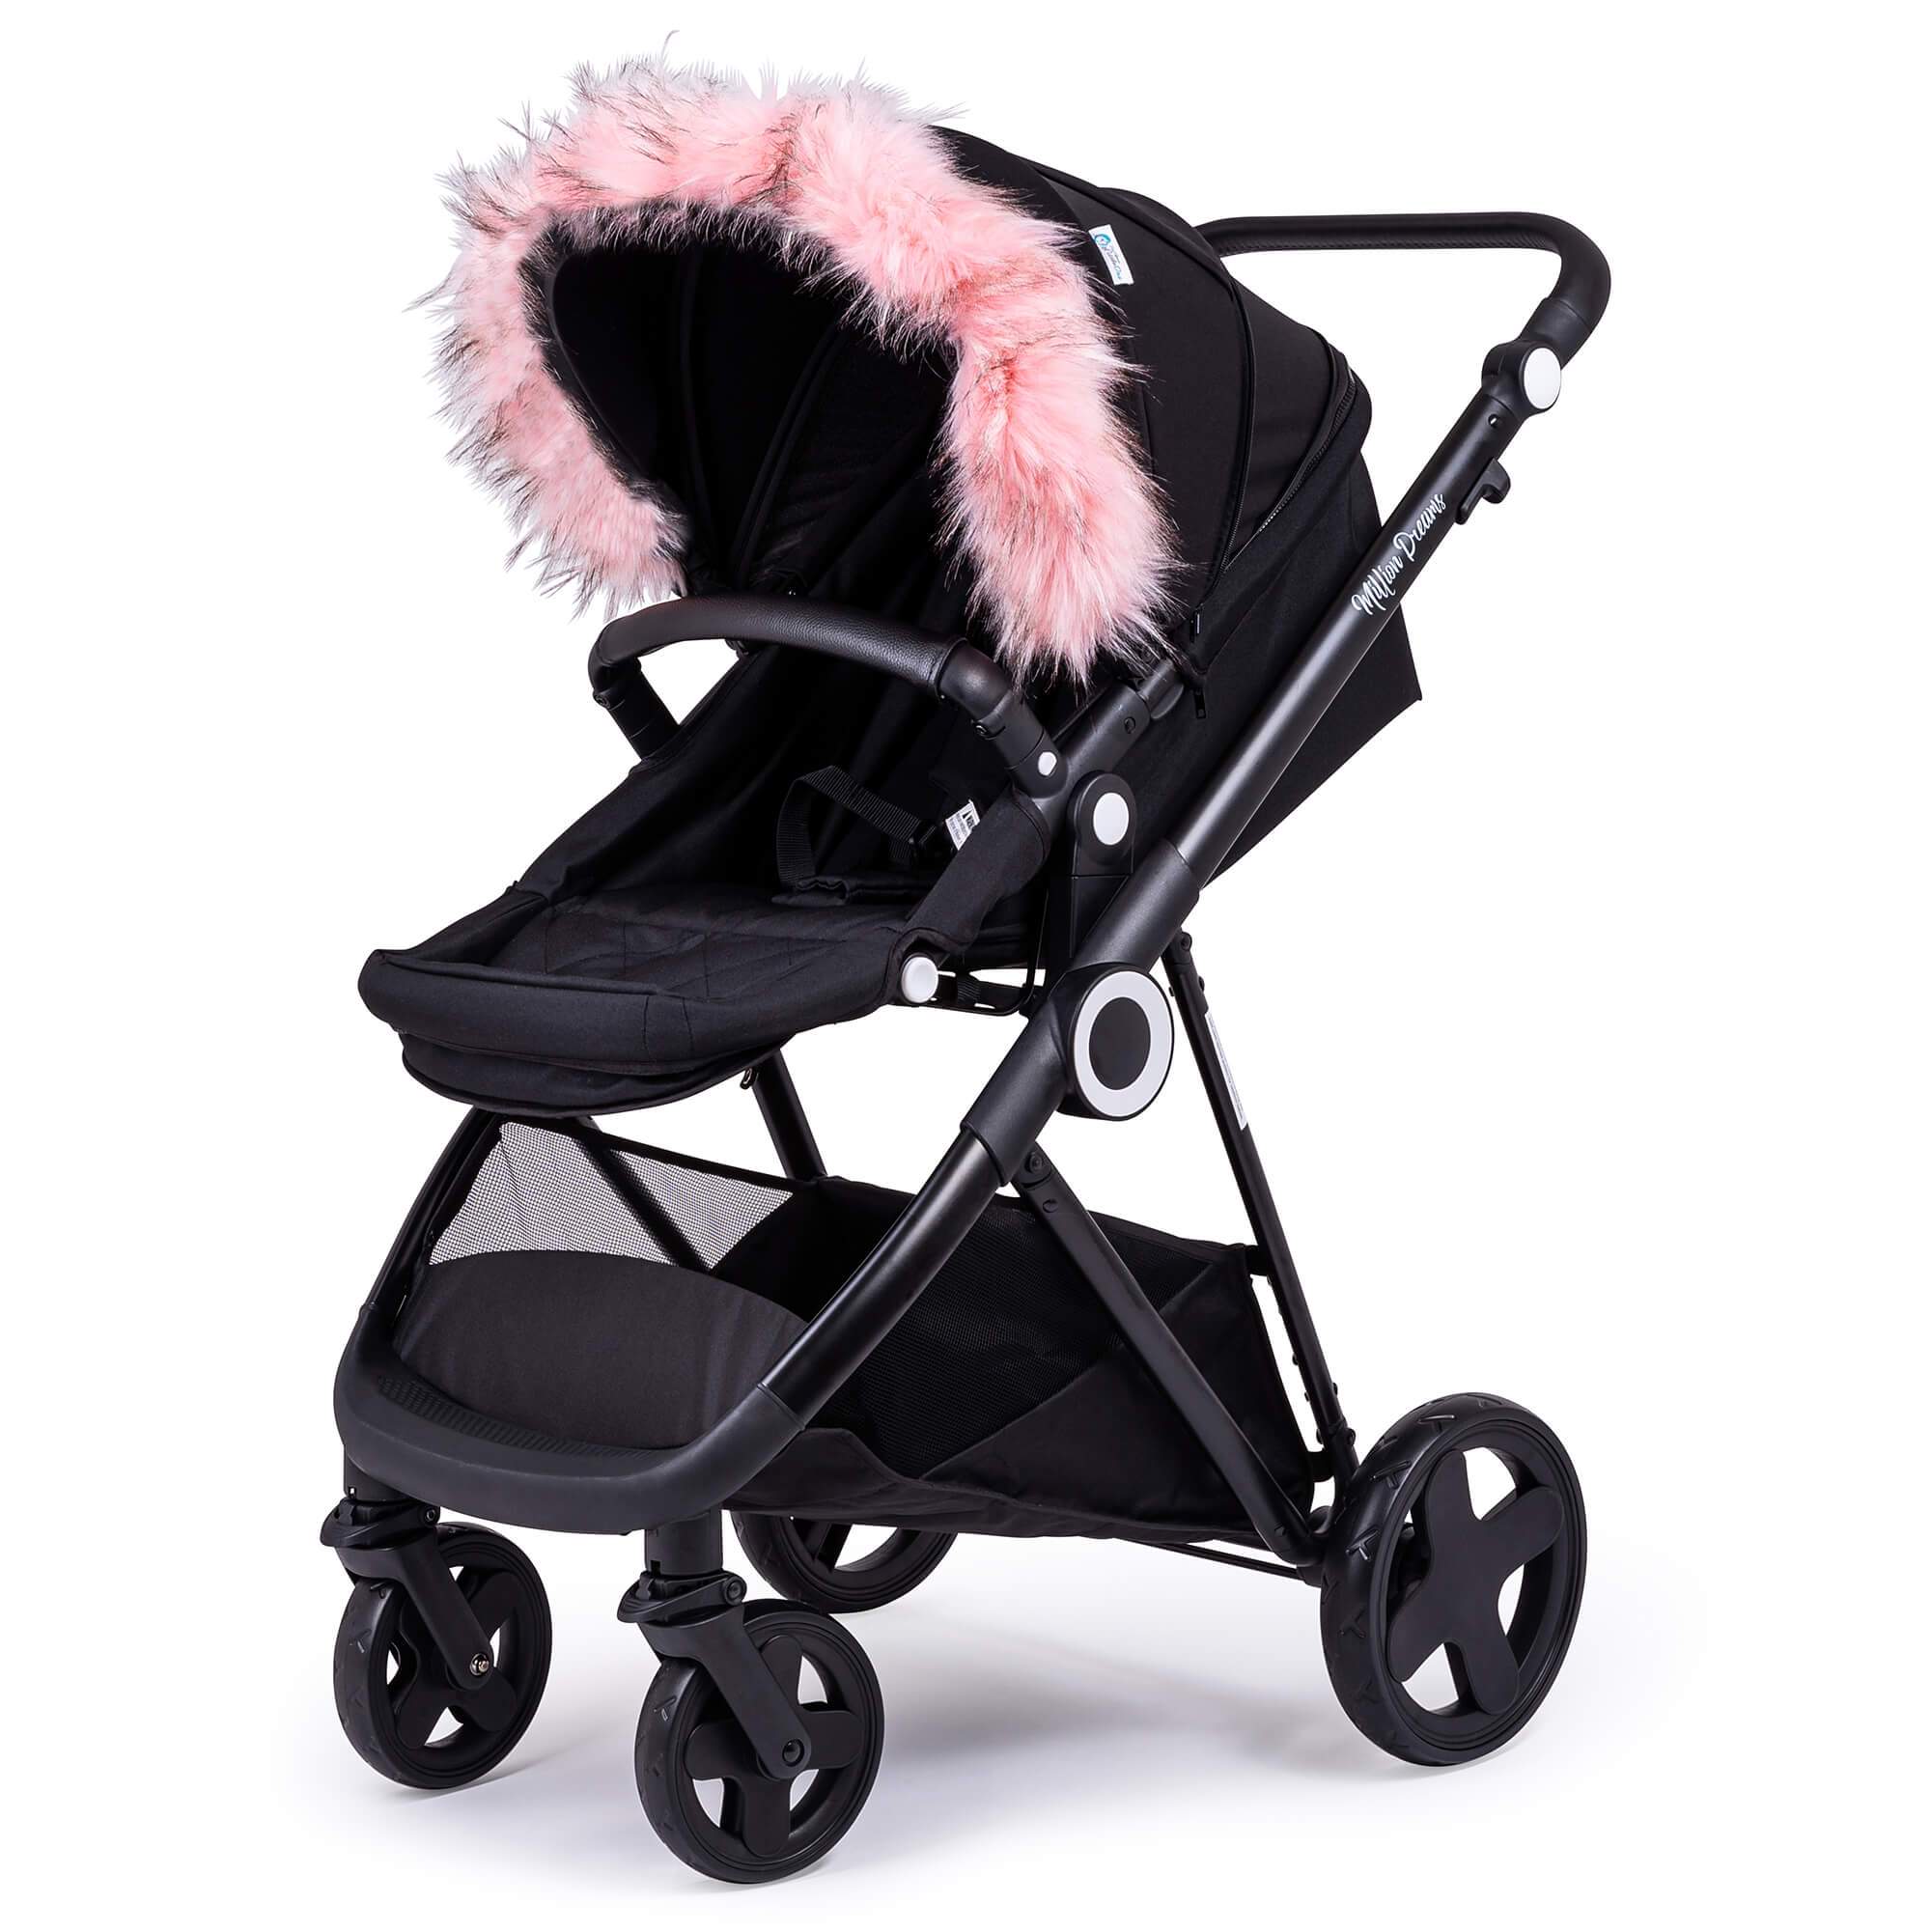 Pram Fur Hood Trim Attachment for Pushchair - Light Pink / Fits All Models | For Your Little One